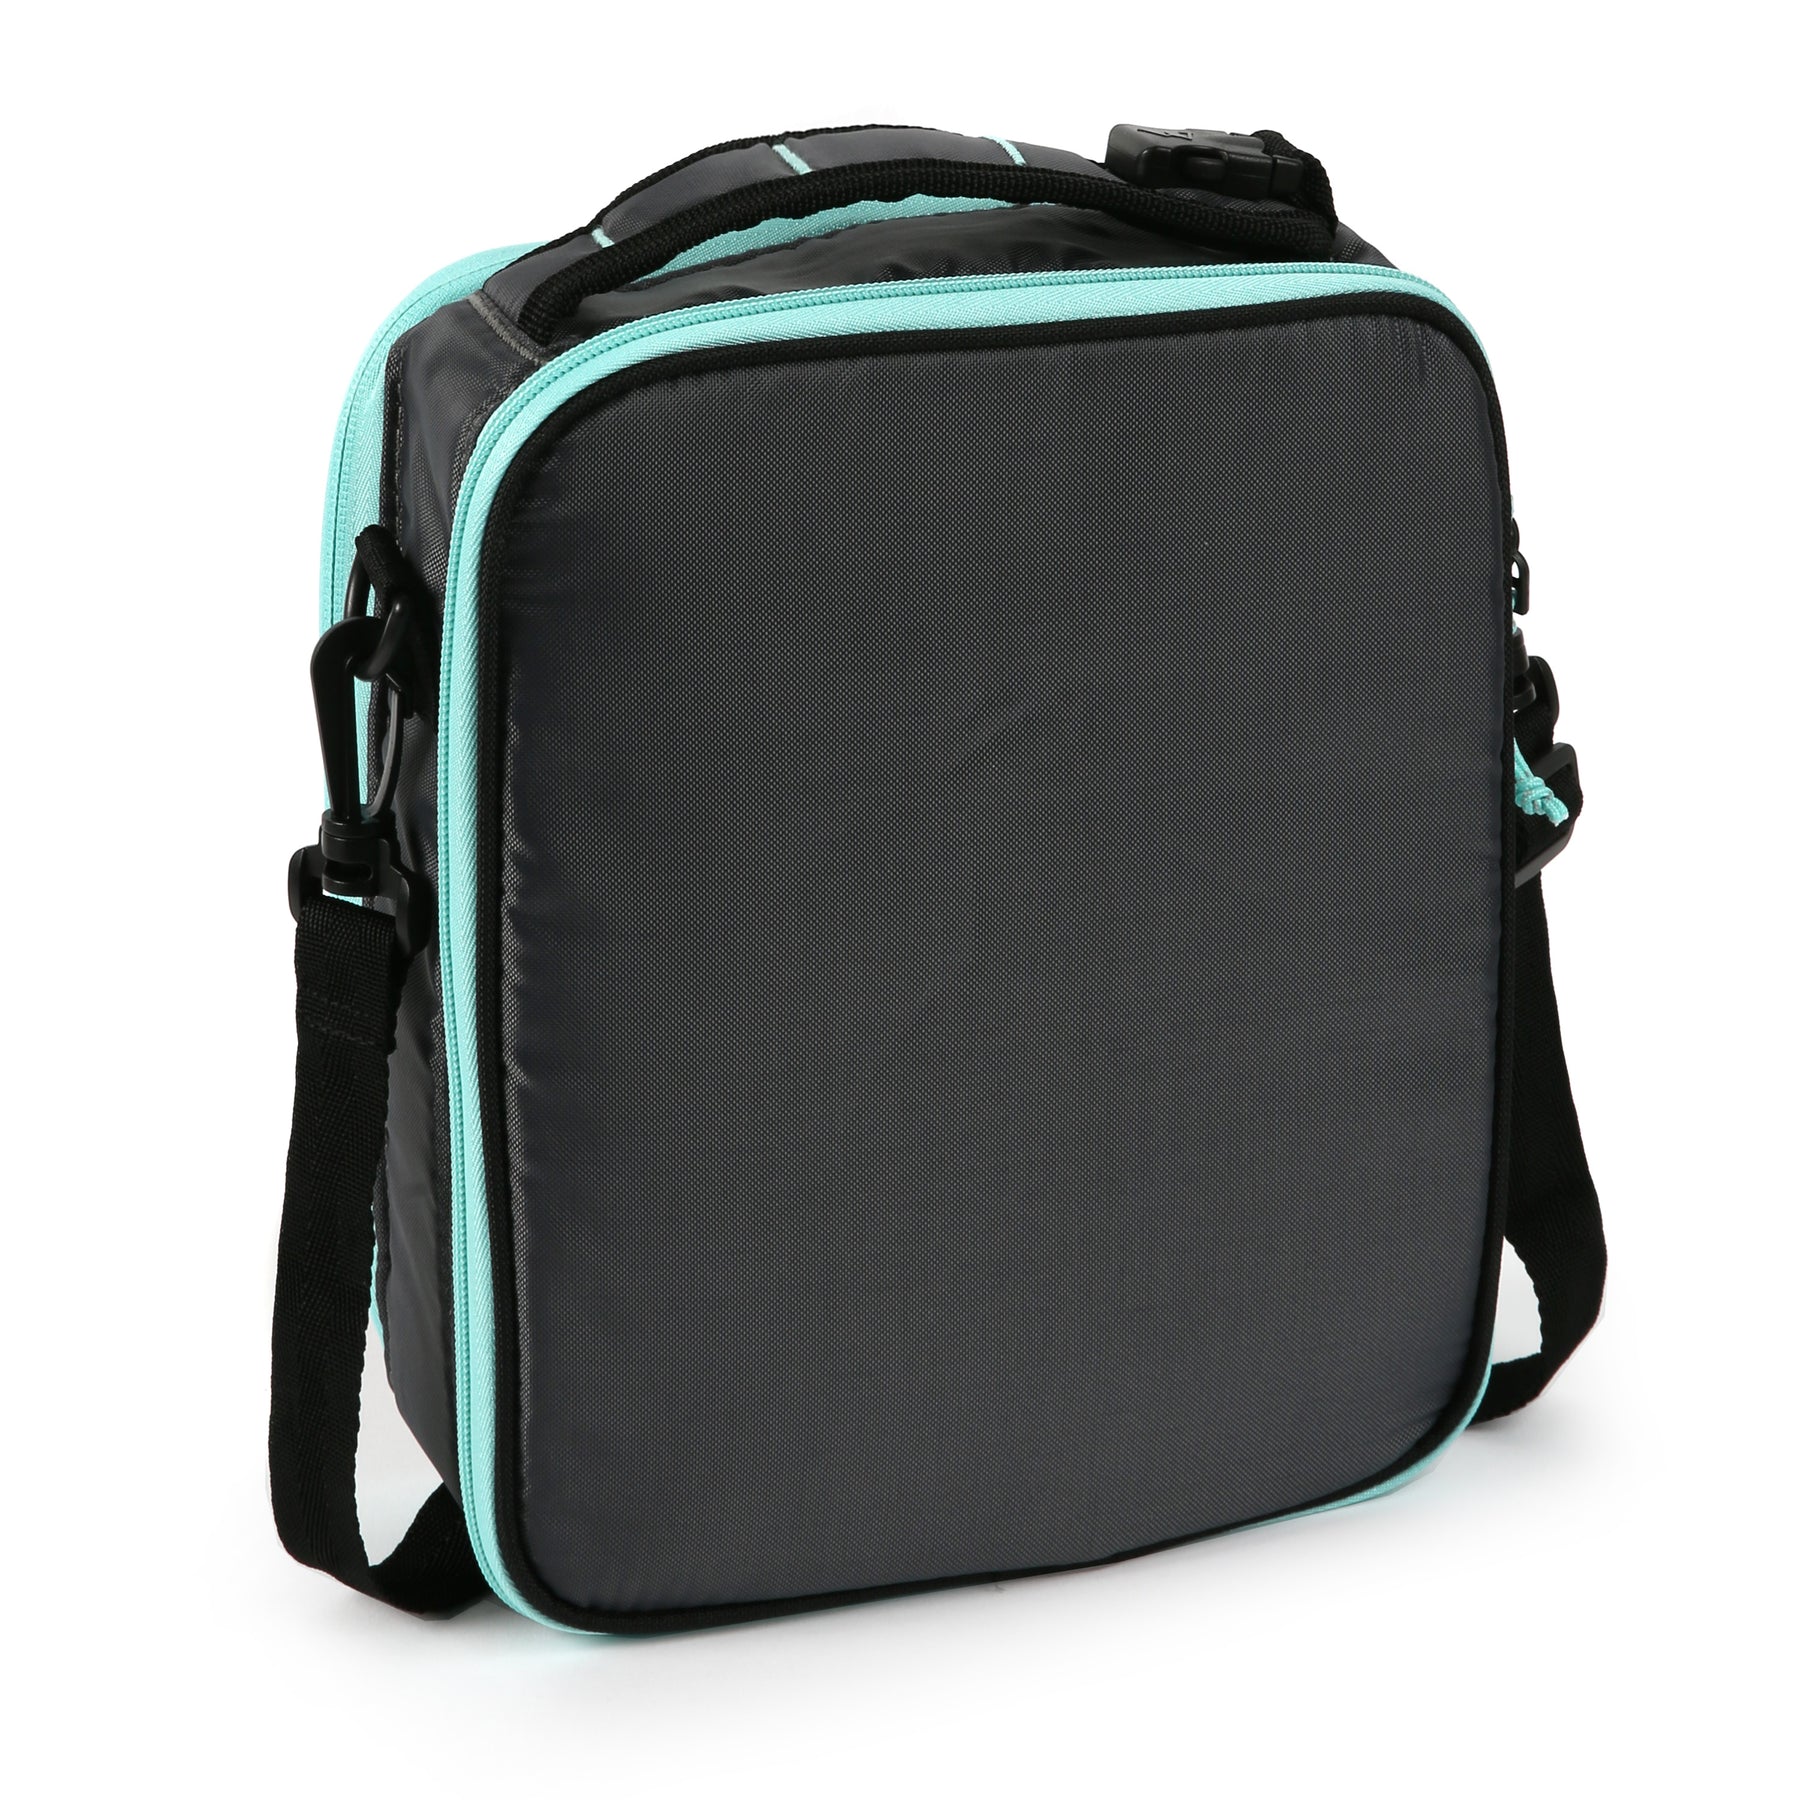 High Performance Ultimate Upright Expandable Lunch Pack